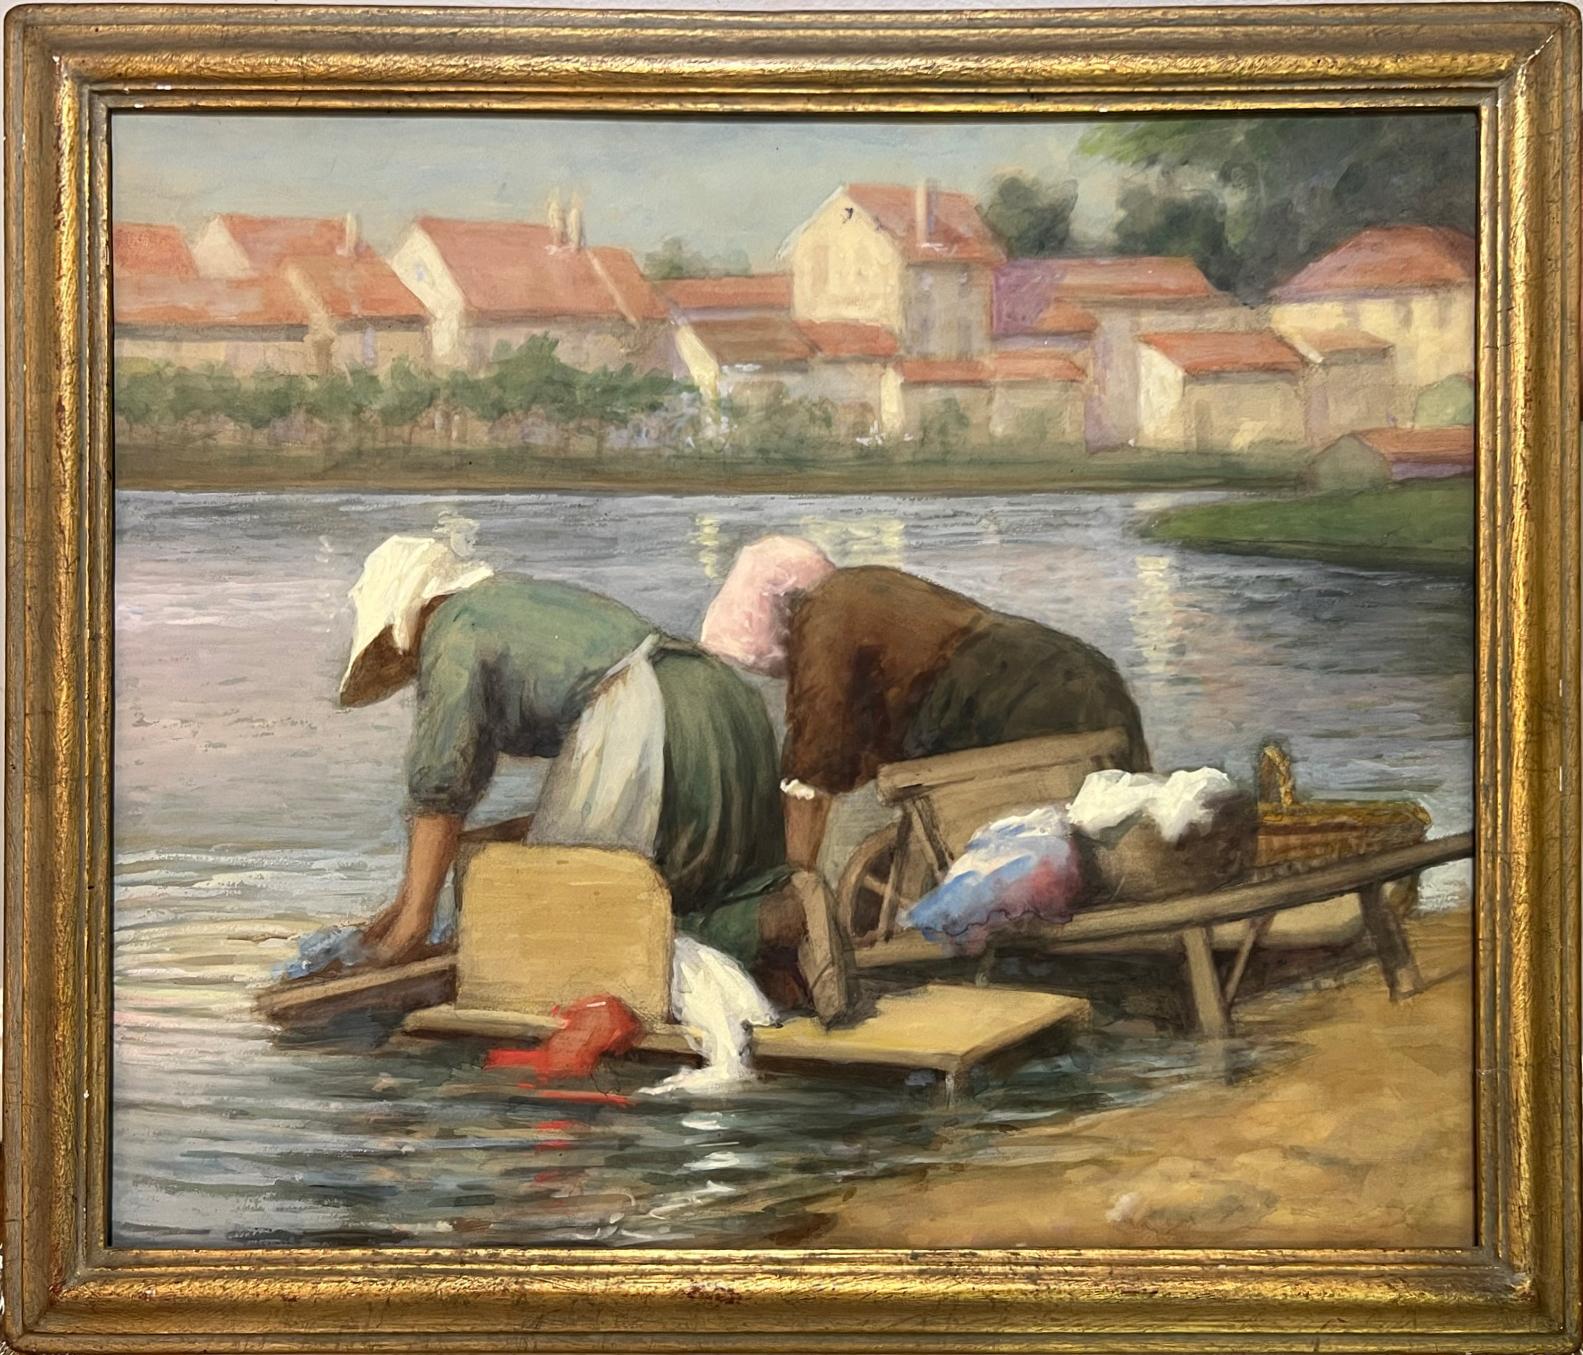 Multi-Exhibition Labels FRENCH IMPRESSIONIST Washerwoman Banks of Loing River - Mixed Media Art by Lee Lufkin Kaula